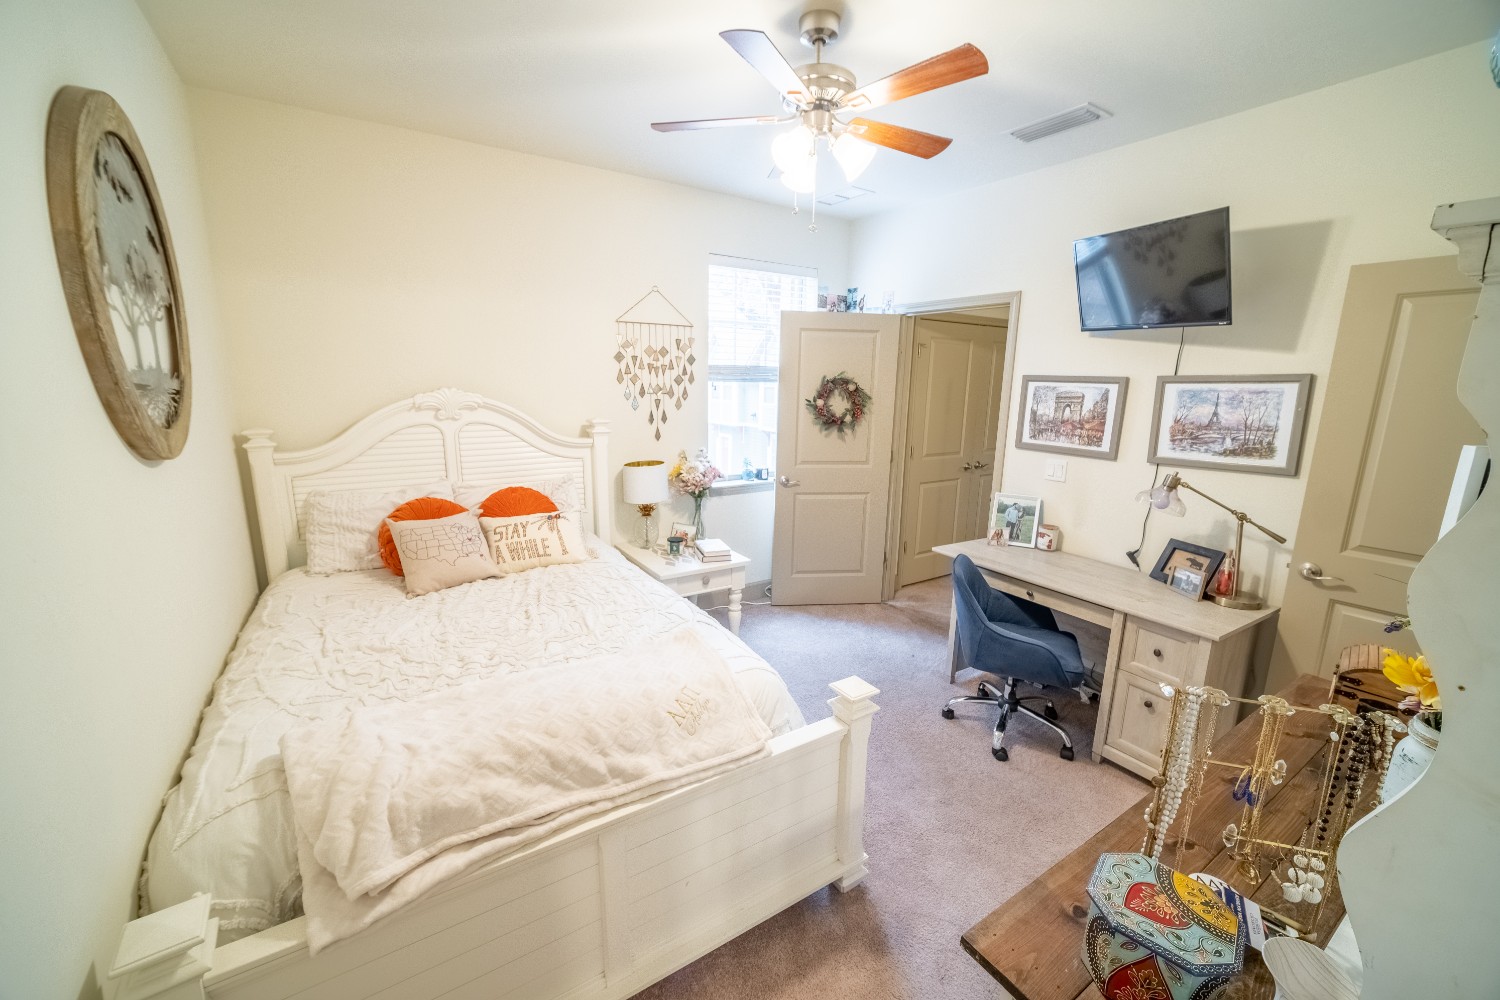 Plenty of room for full/queen size bed, dresser, and desk in these spacious bedrooms